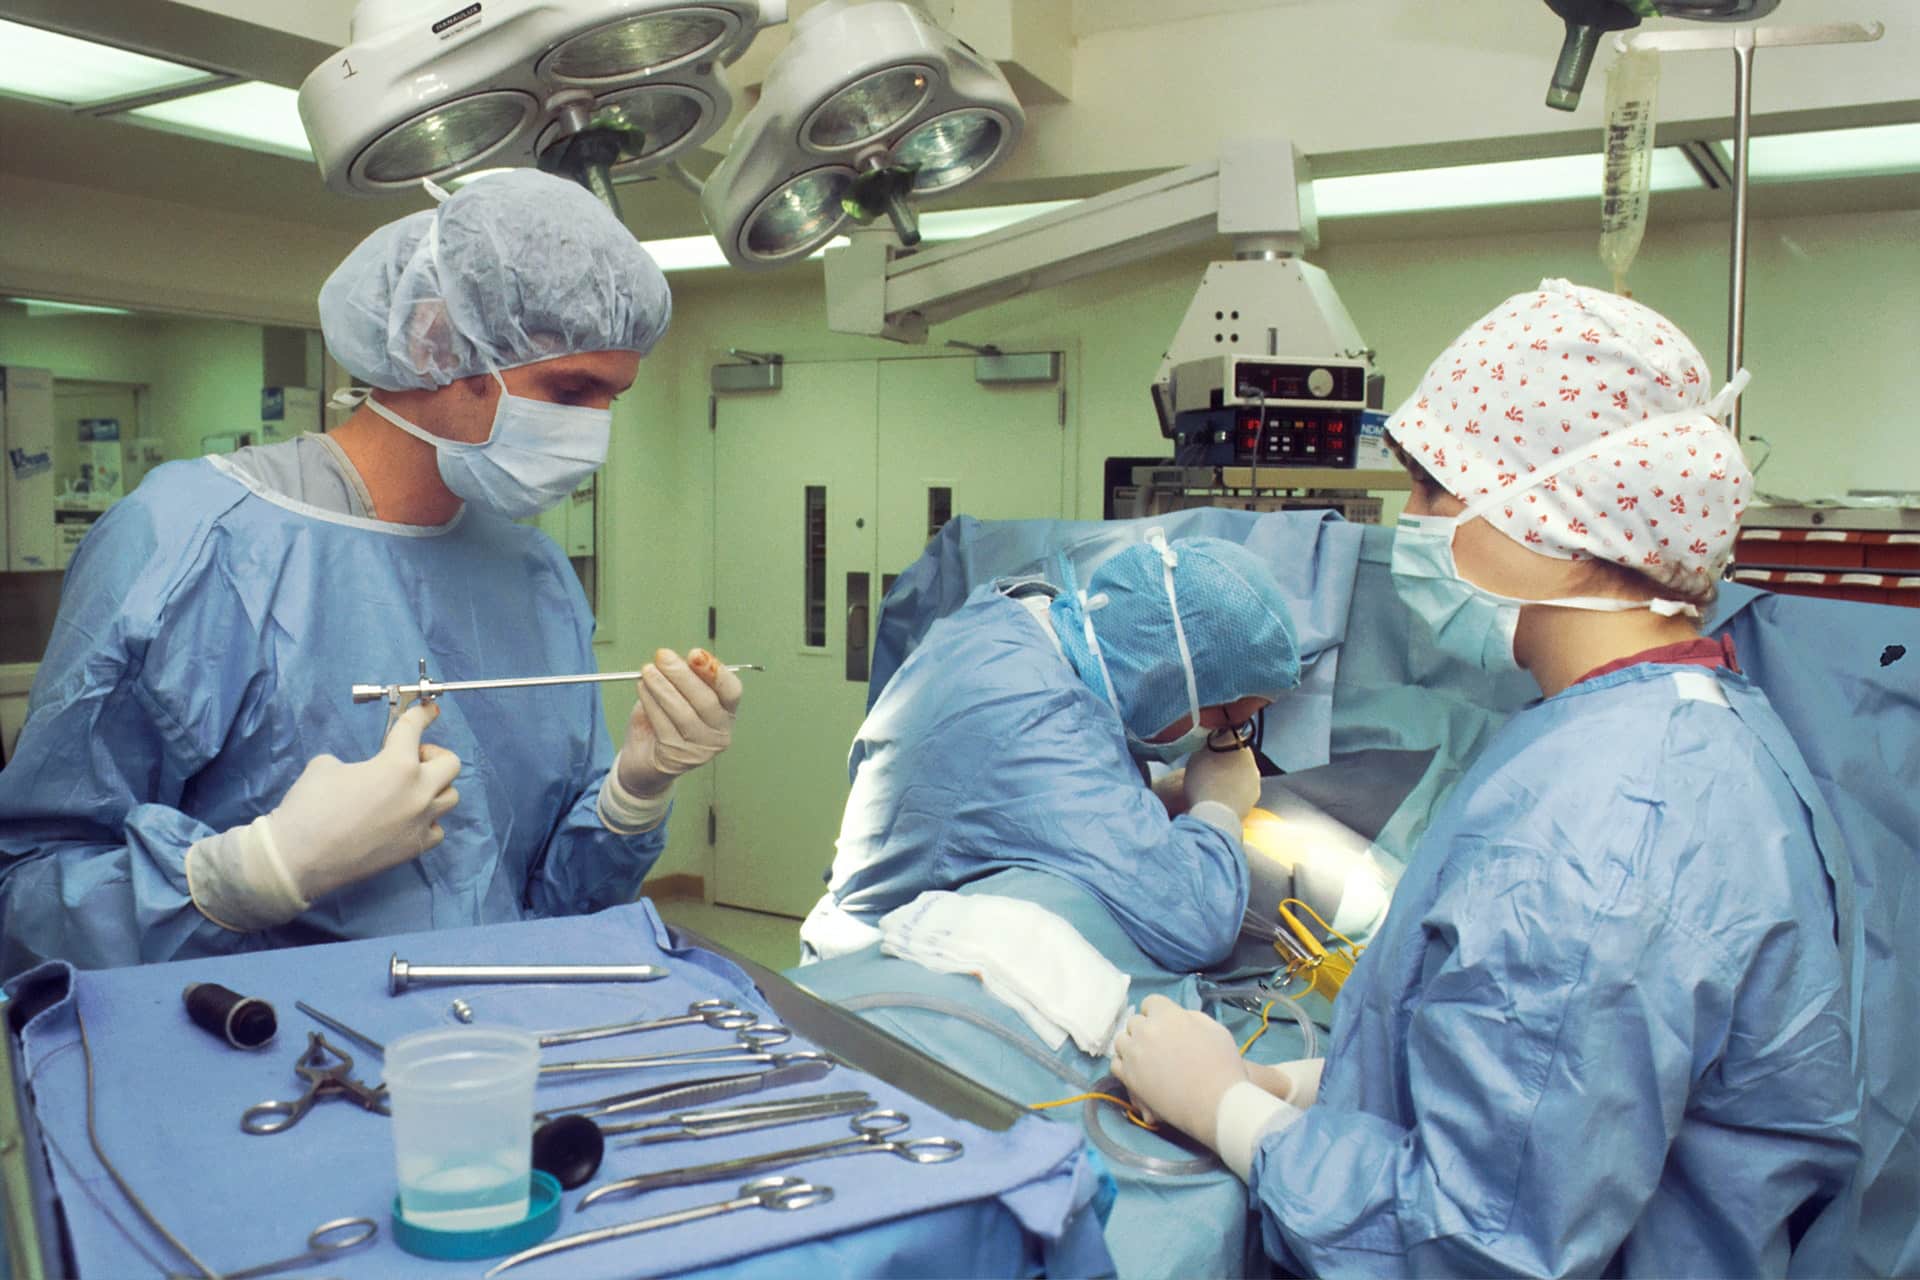 Medical Malpractice Lawsuit against Wrong Surgery